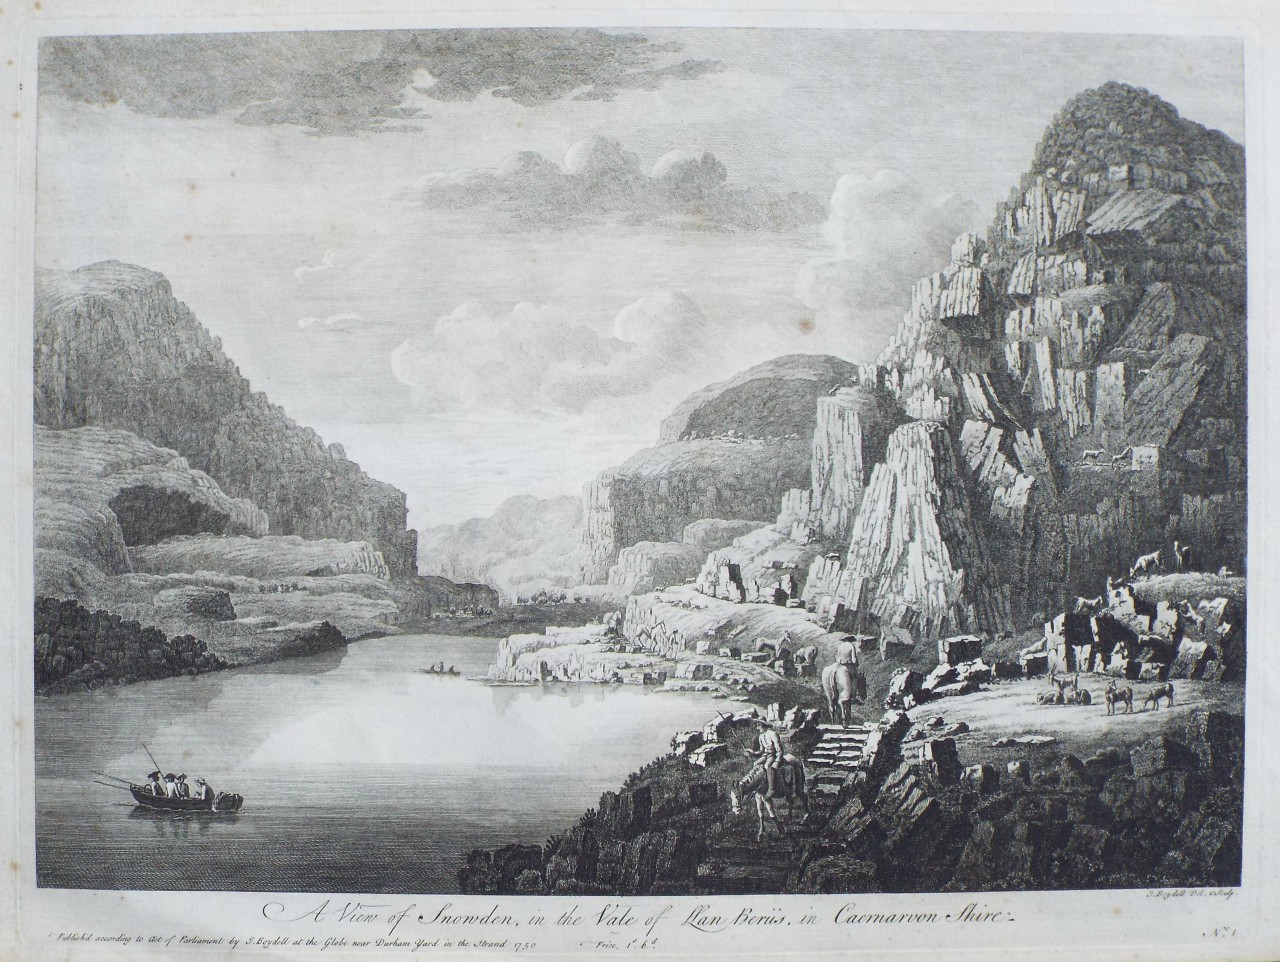 Print - A View of Snowden, in the Vale of Llan Berus, in Caernarvon Shire. - Boydell